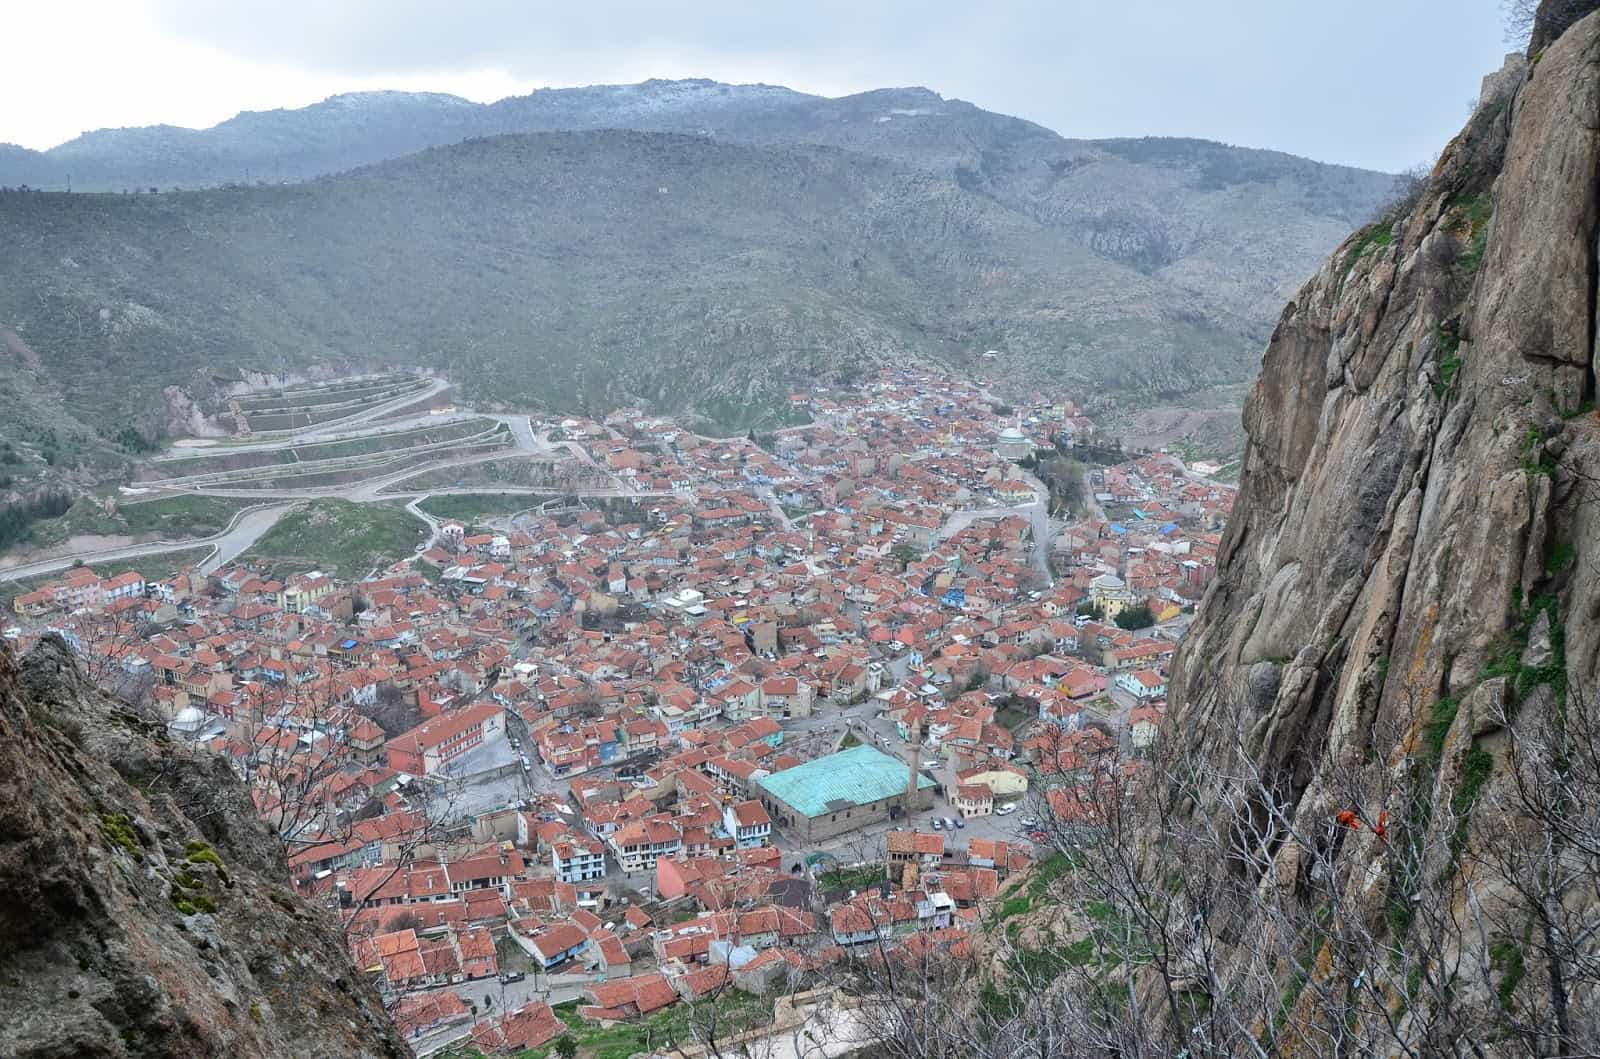 The view from Afyon Kalesi in Afyon, Turkey